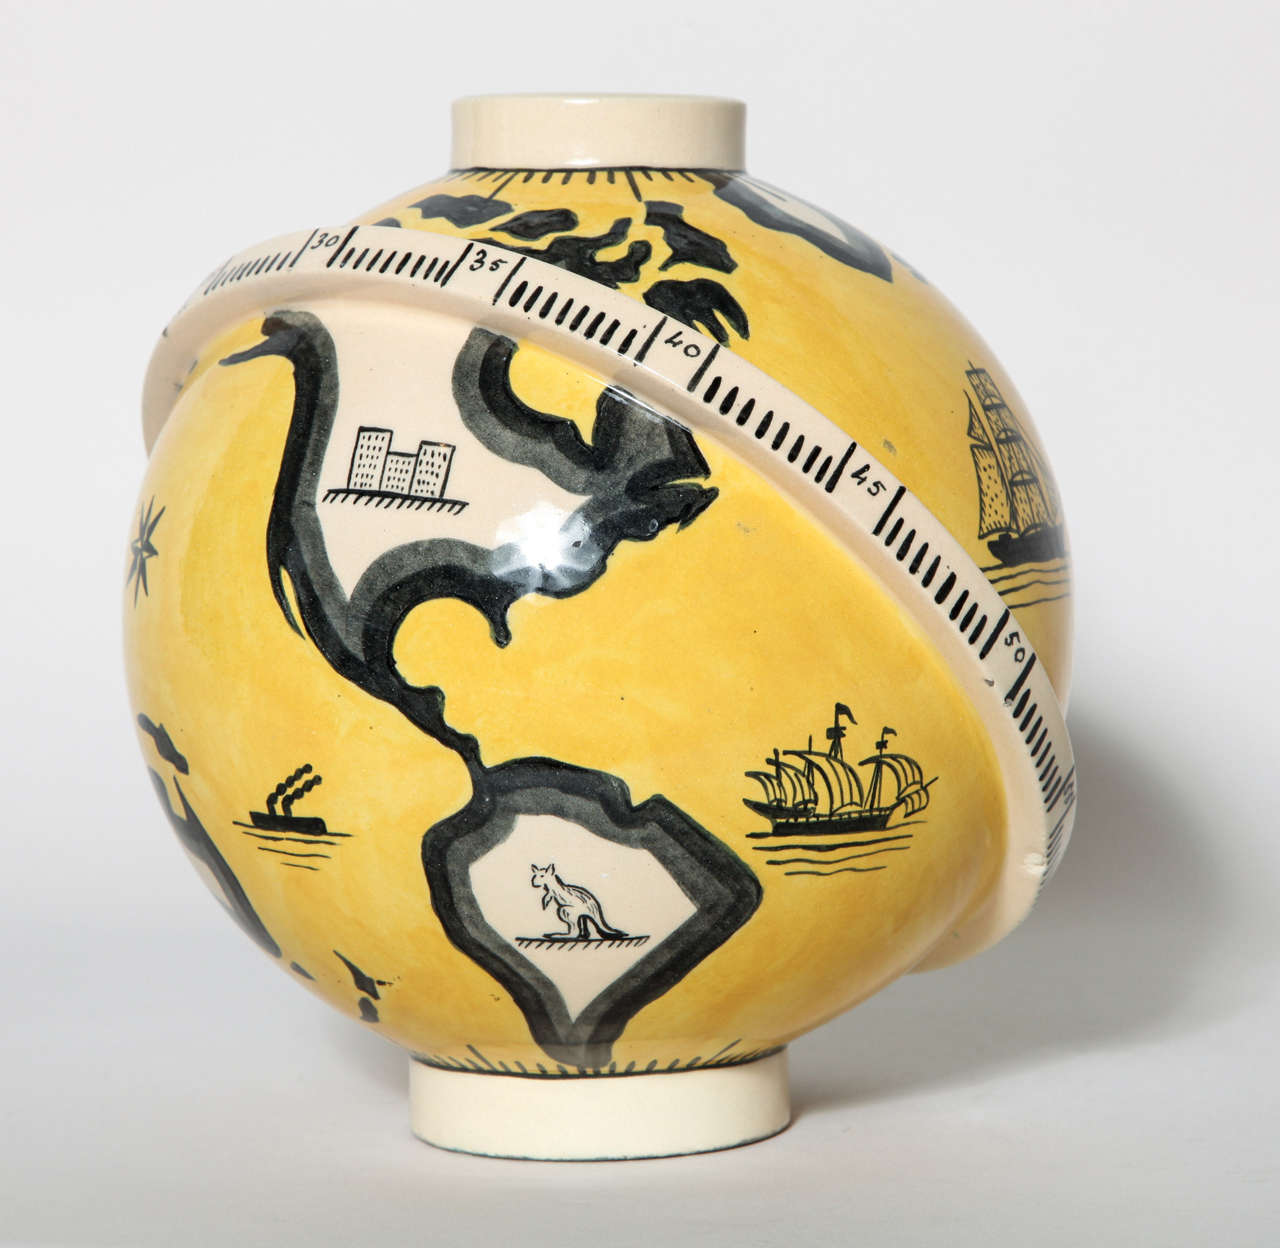 This spherical vase represents the globe with depiction of various continents, ships and scenes from around the world.

After studying at l'École des Beaux-Arts in Dijon under the guidance of Ovide Yencesse, Robert Lallemant went to work at